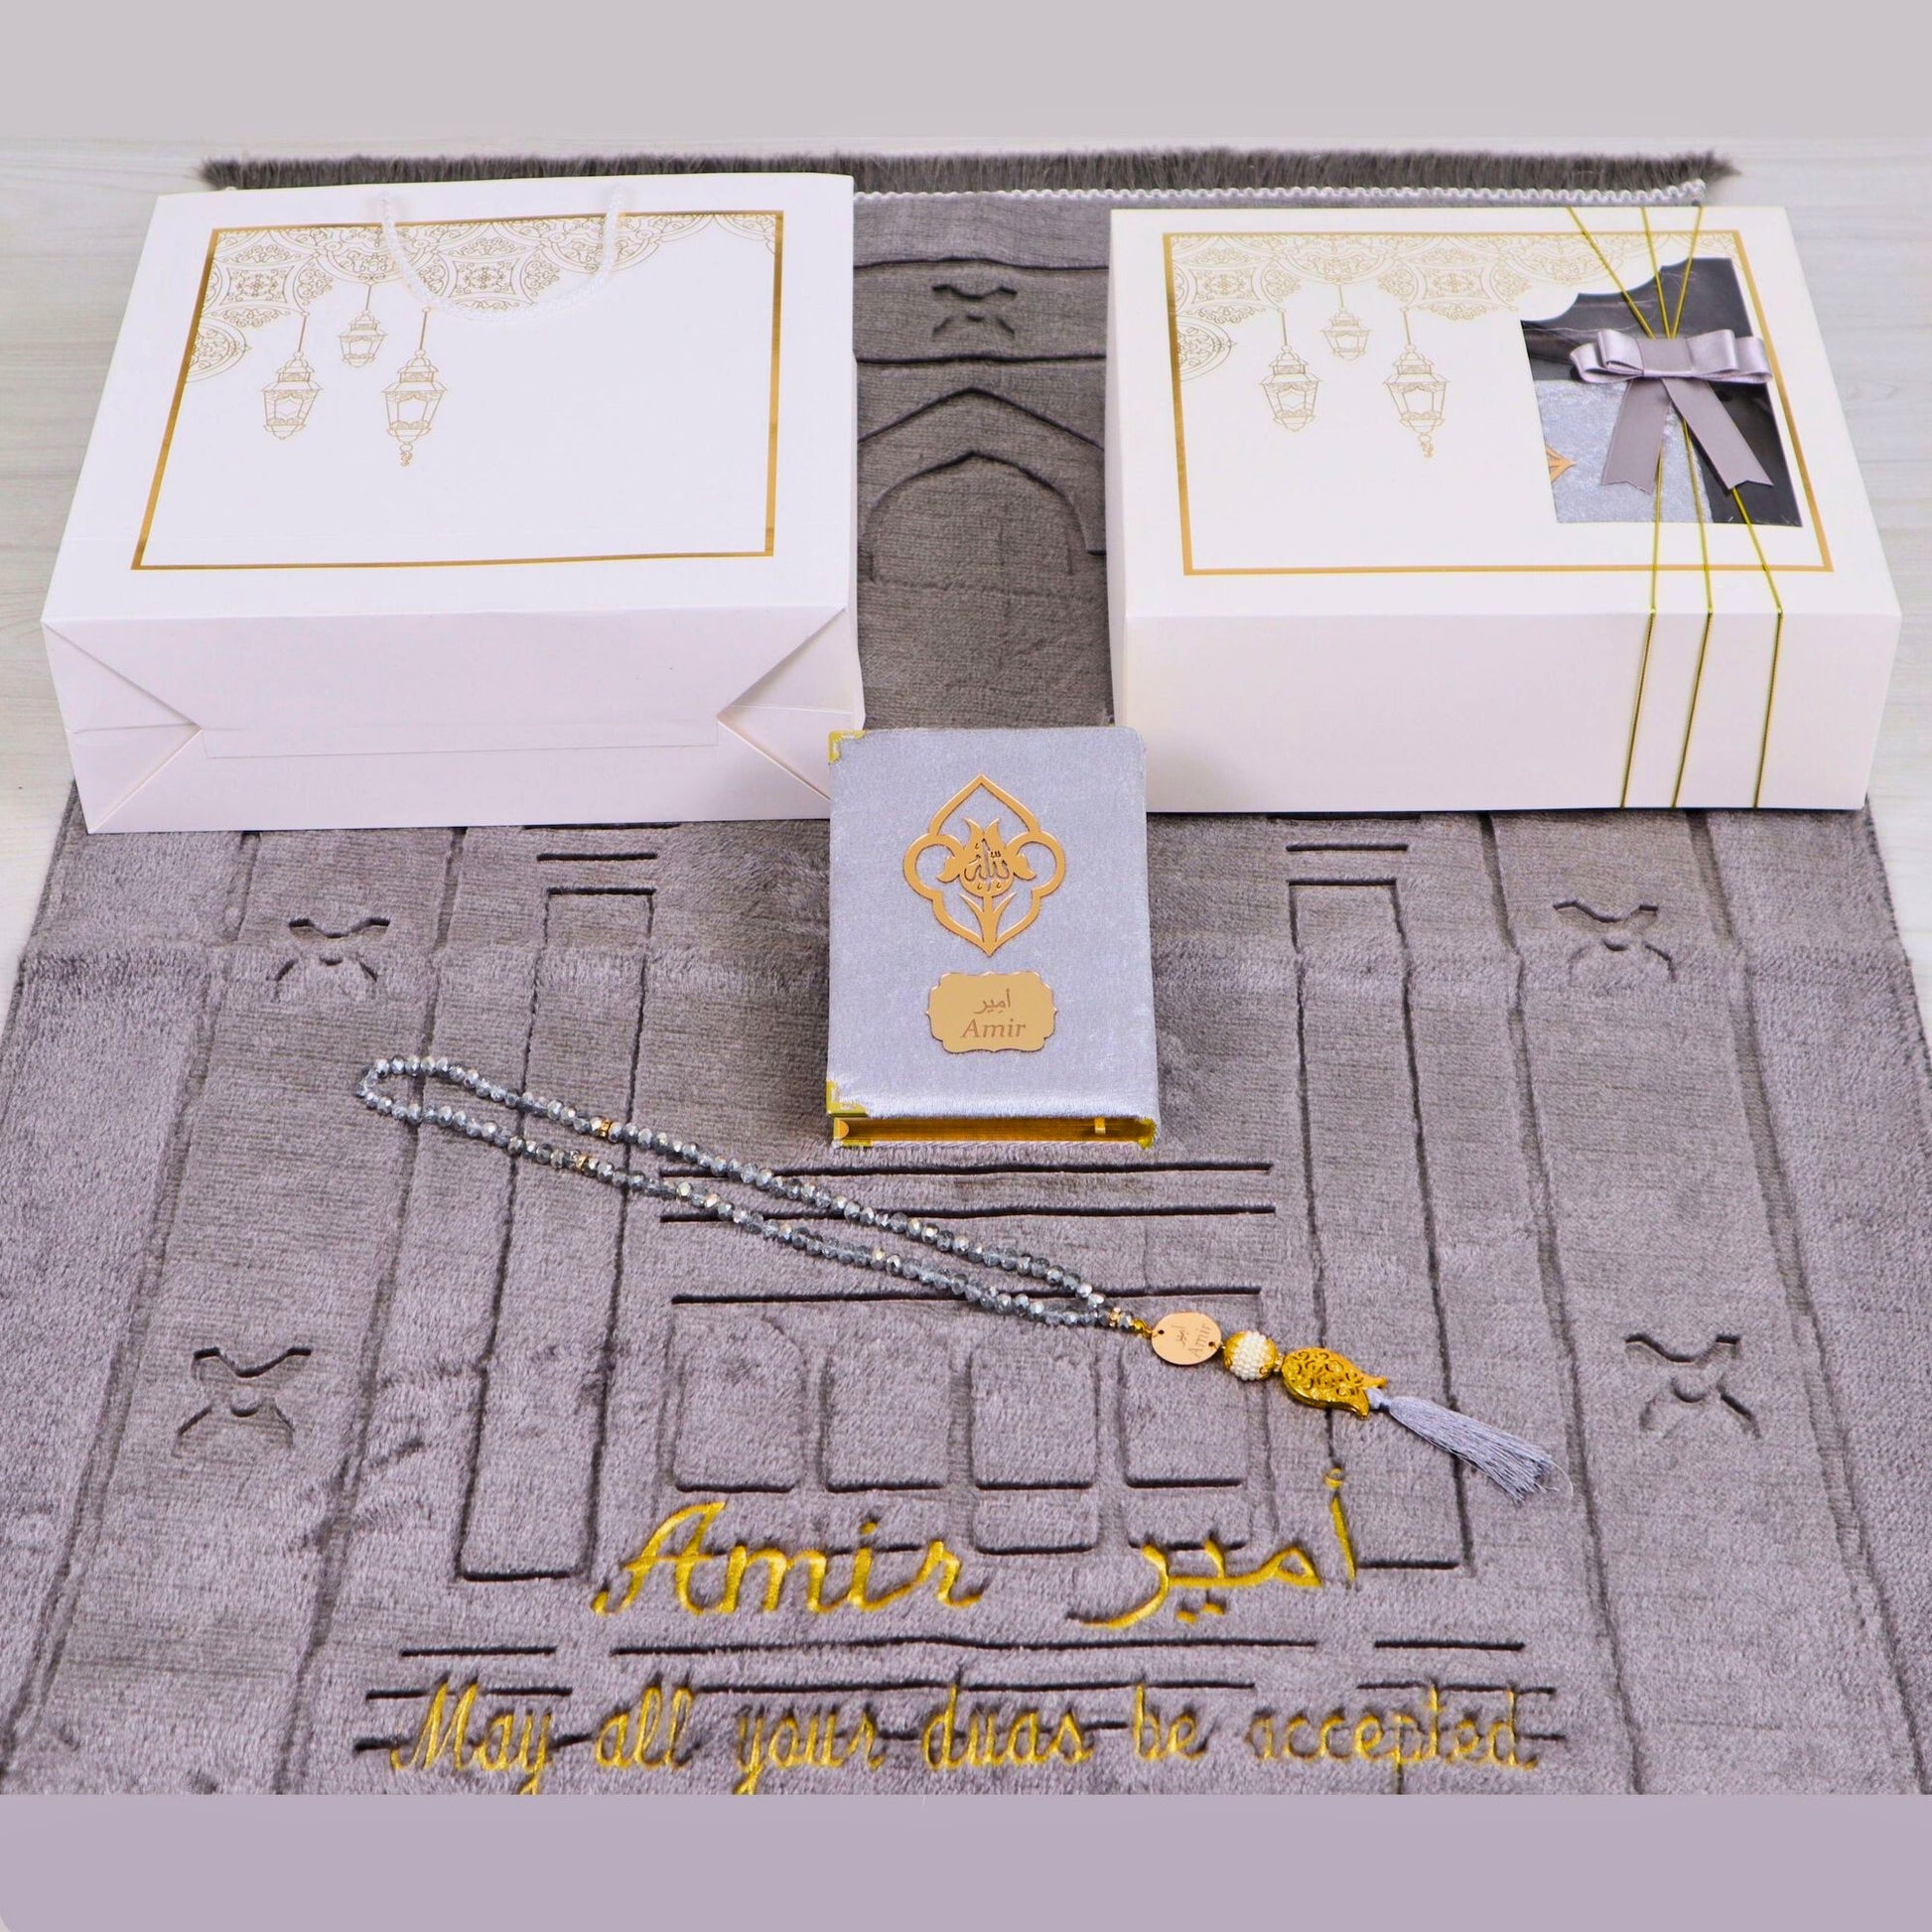 Personalized Soft Plush Prayer Mat Quran Tasbeeh Islamic Gift Set - Islamic Elite Favors is a handmade gift shop offering a wide variety of unique and personalized gifts for all occasions. Whether you're looking for the perfect Ramadan, Eid, Hajj, wedding gift or something special for a birthday, baby shower or anniversary, we have something for everyone. High quality, made with love.